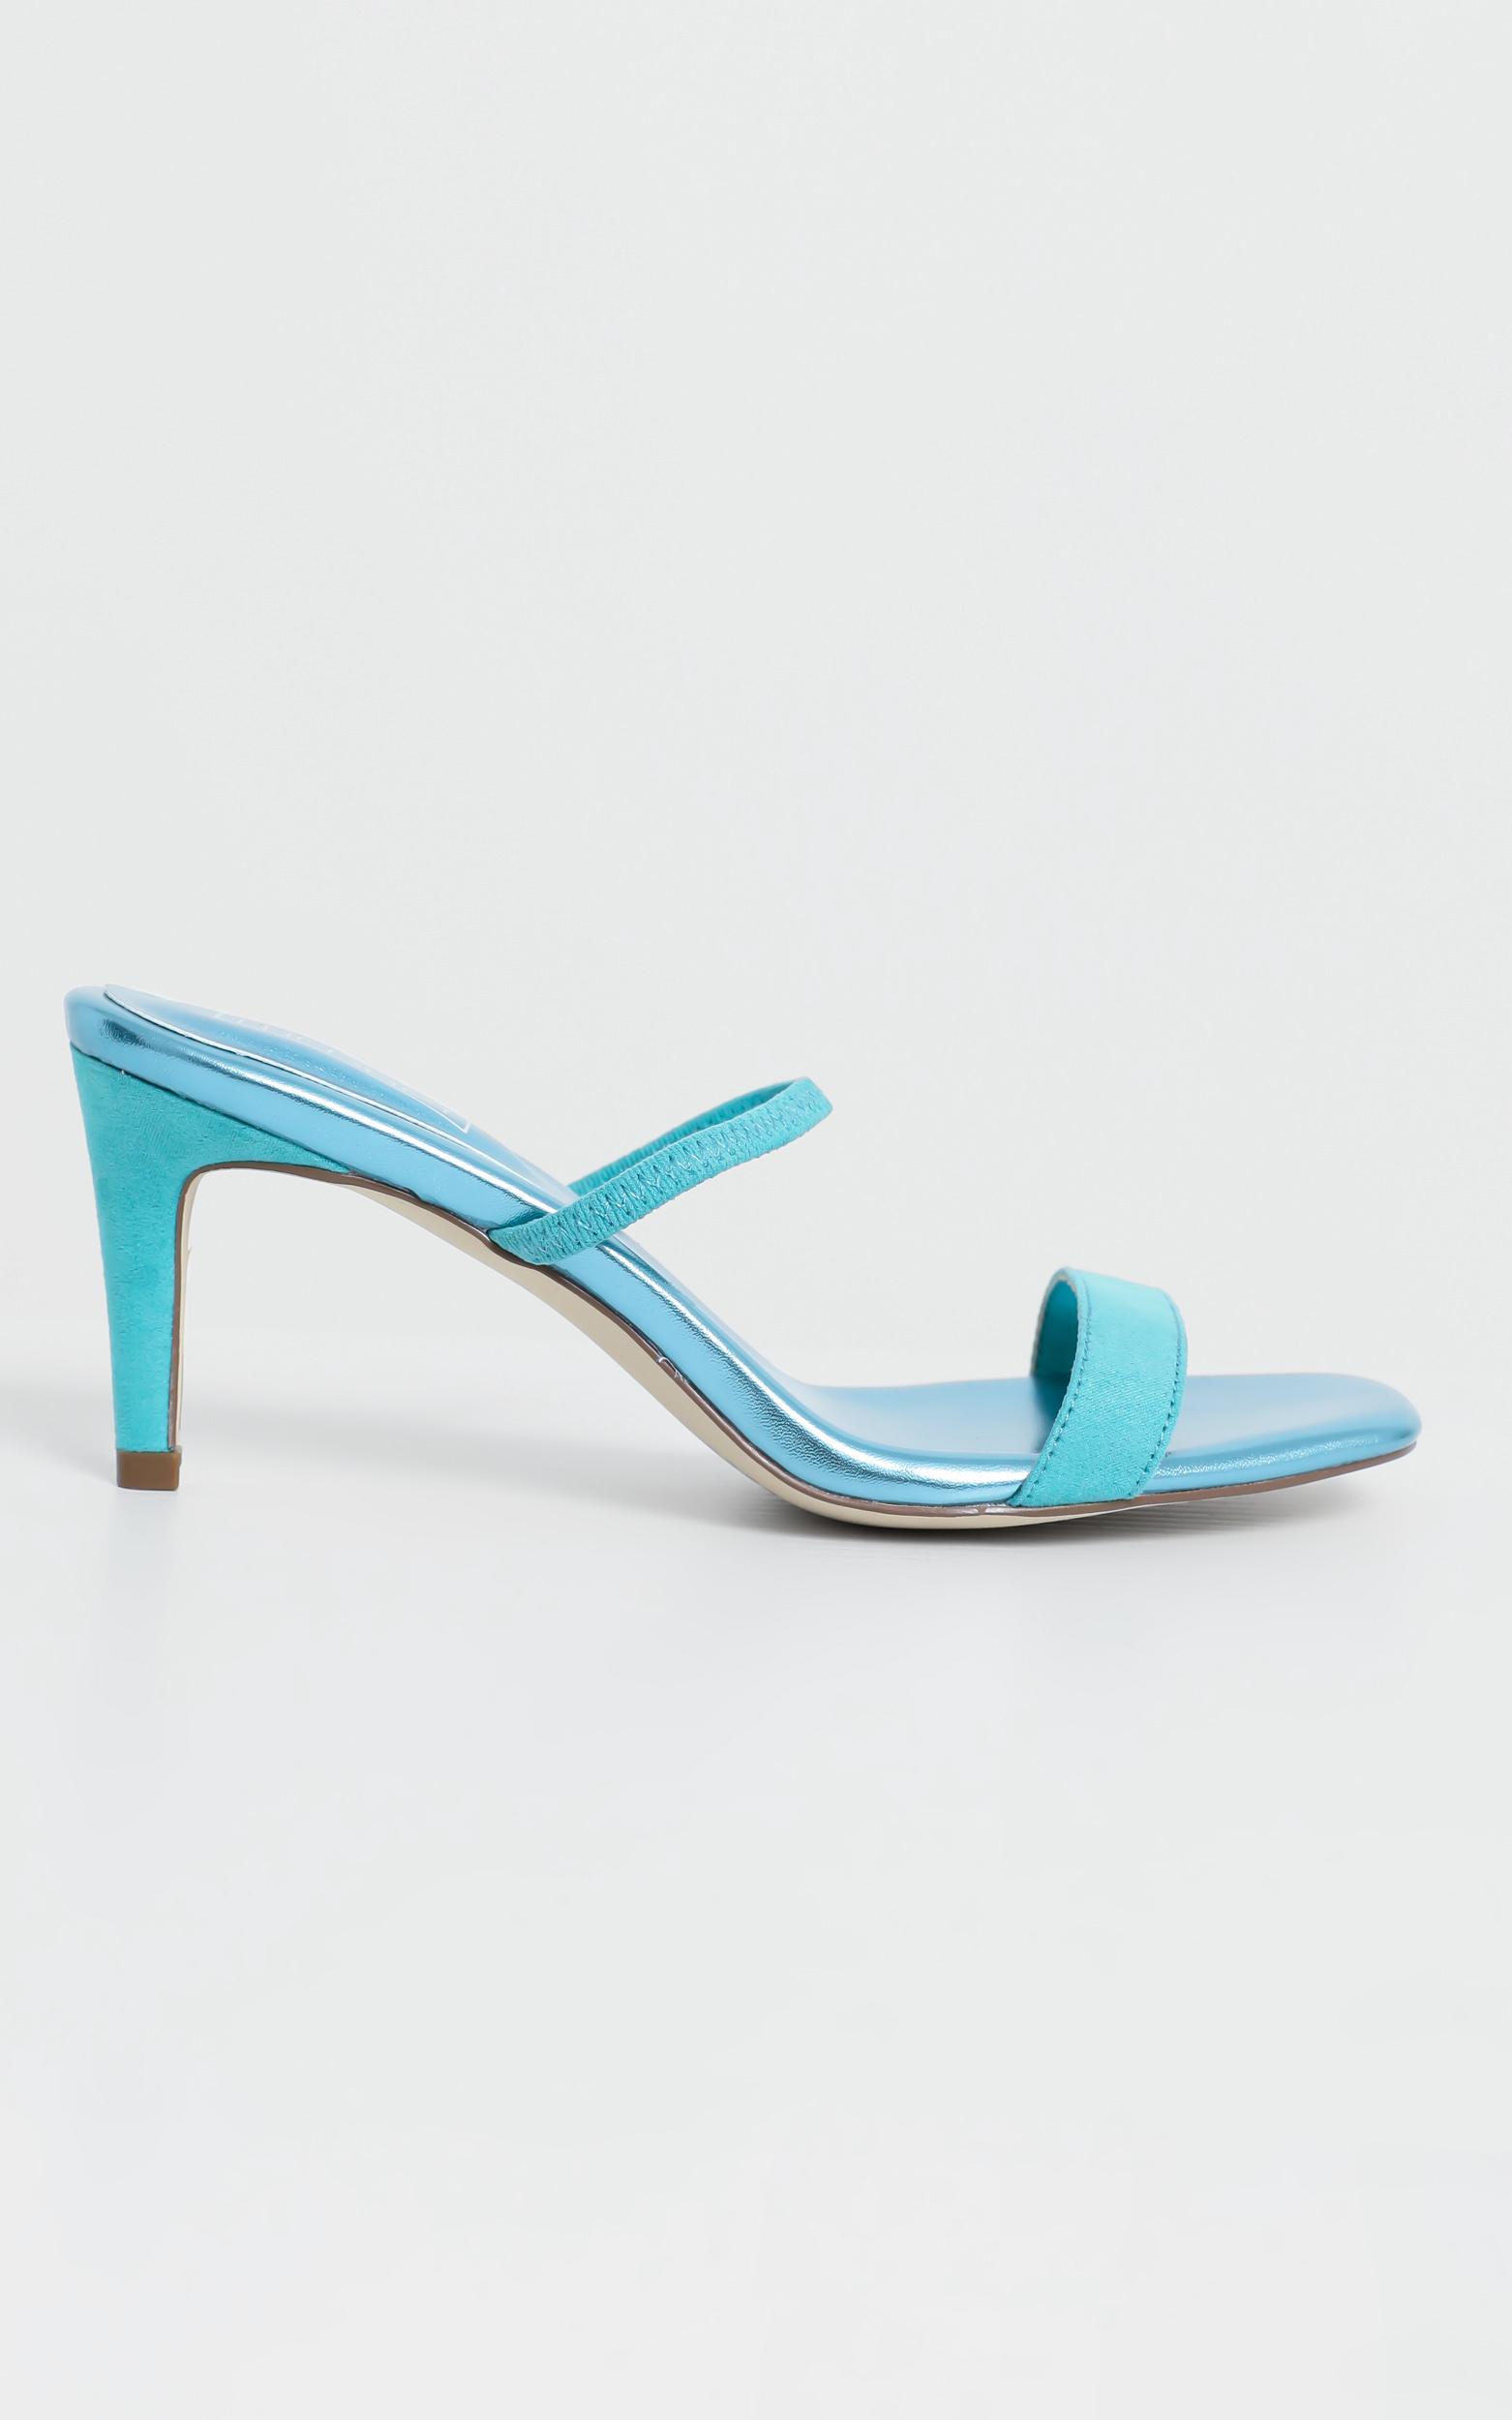 Therapy - Flash Heels in Seafoam - 5, Blue, hi-res image number null